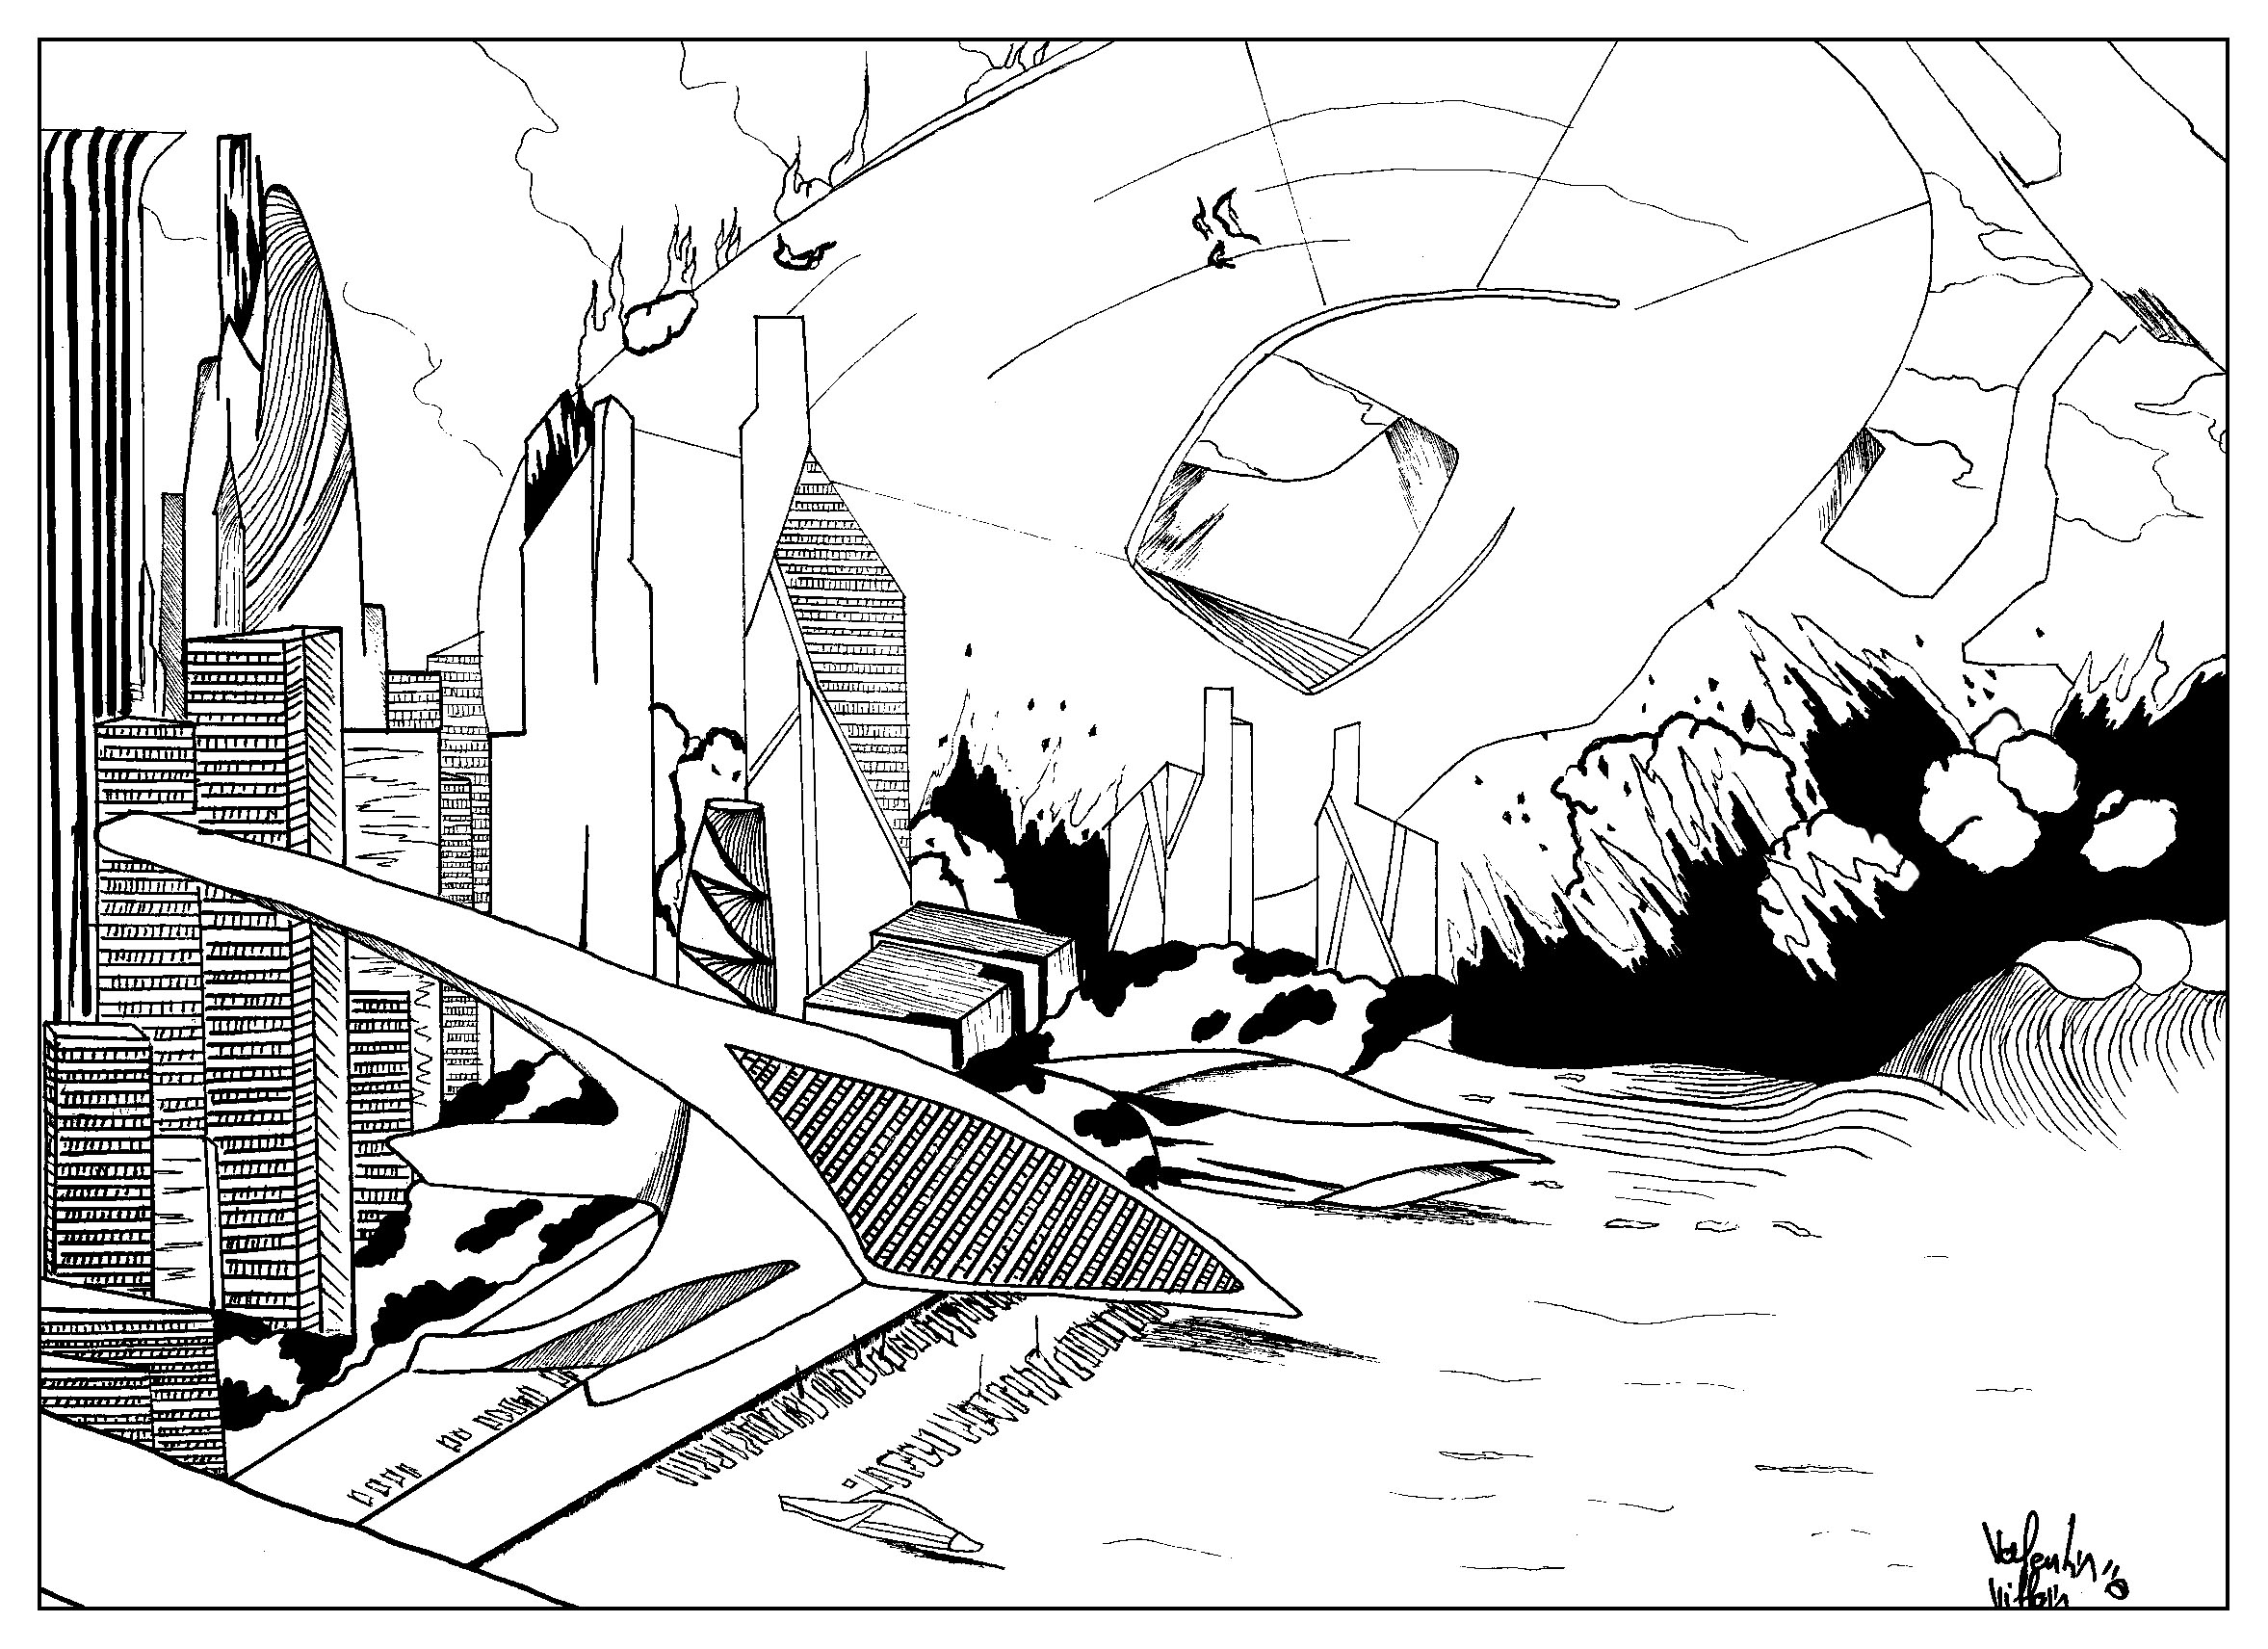 Coloring page inspired by the last scene of the movie Star-Trek into Darkness